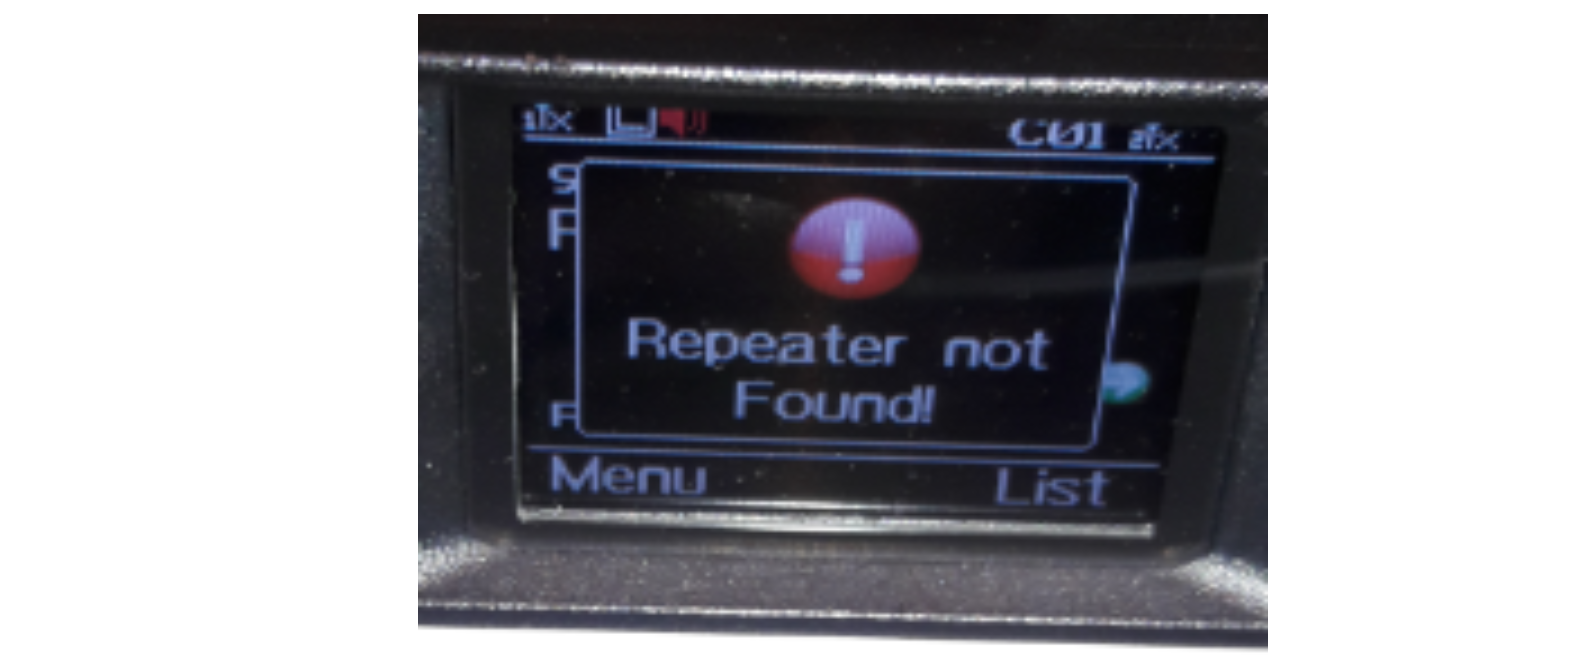 What is this "repeater not found" message on my AnyTone?